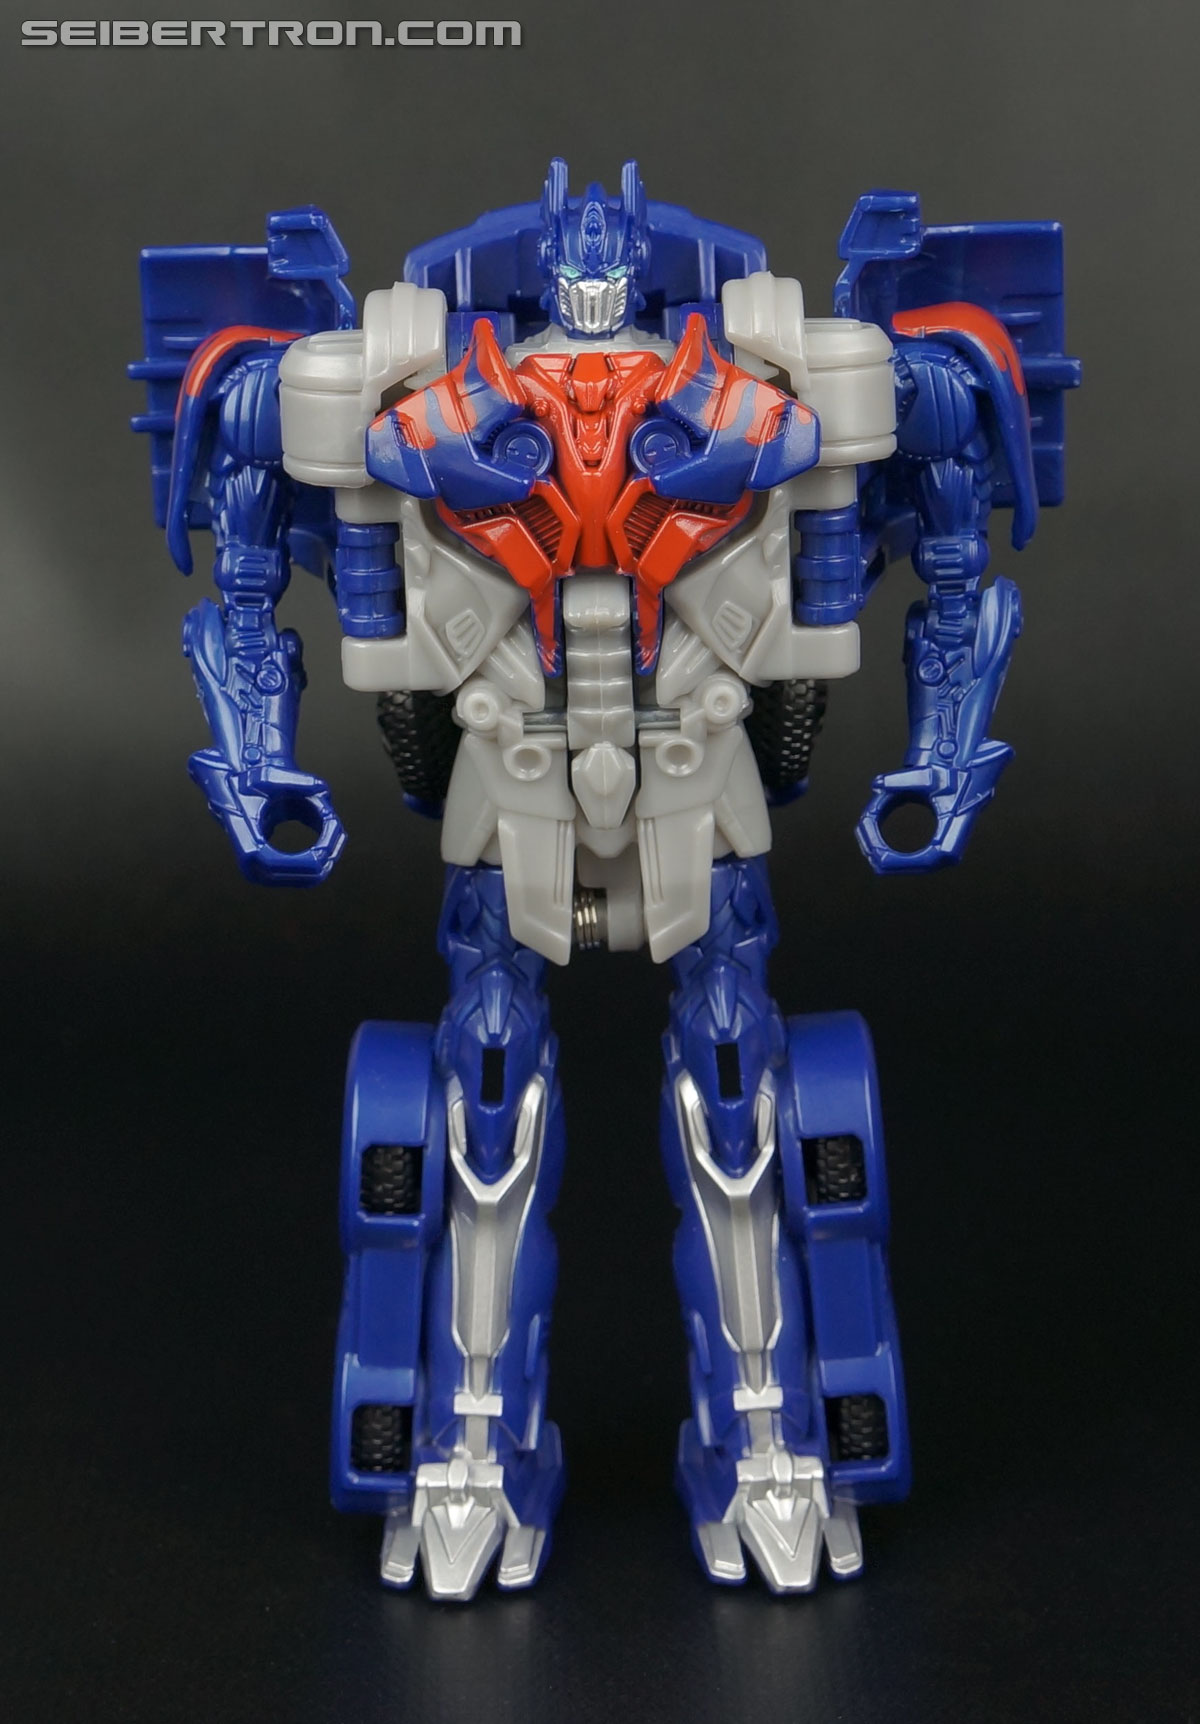 Official Images: Takara Tomy Transformers: Age of Extinction Dual Model ...